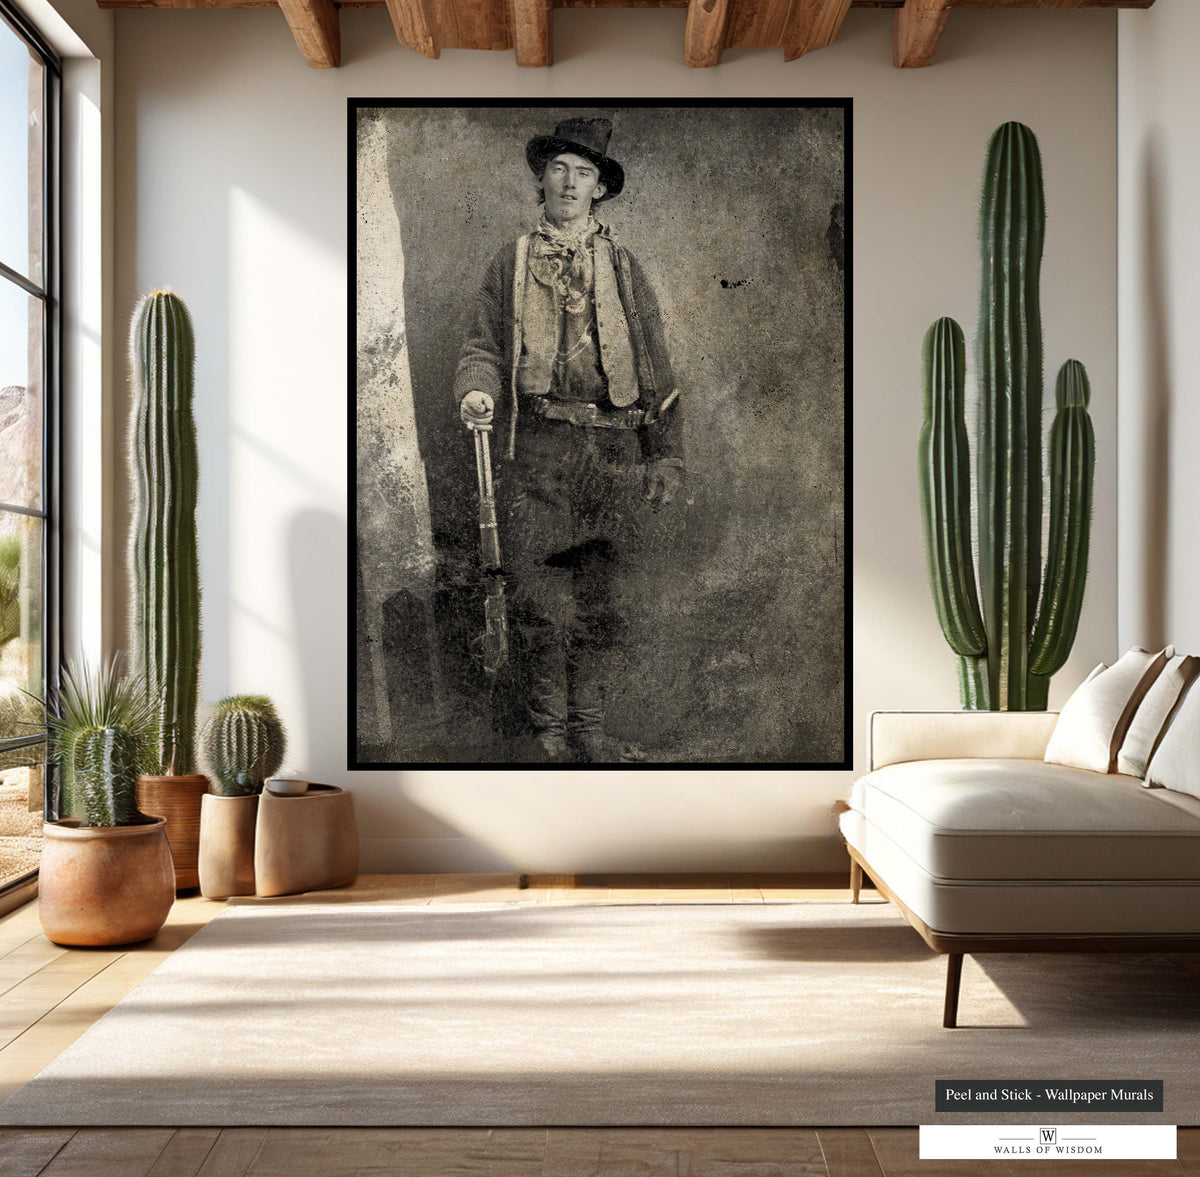 Luxury textured wallpaper featuring vintage picture of cowboy Billy the Kid.